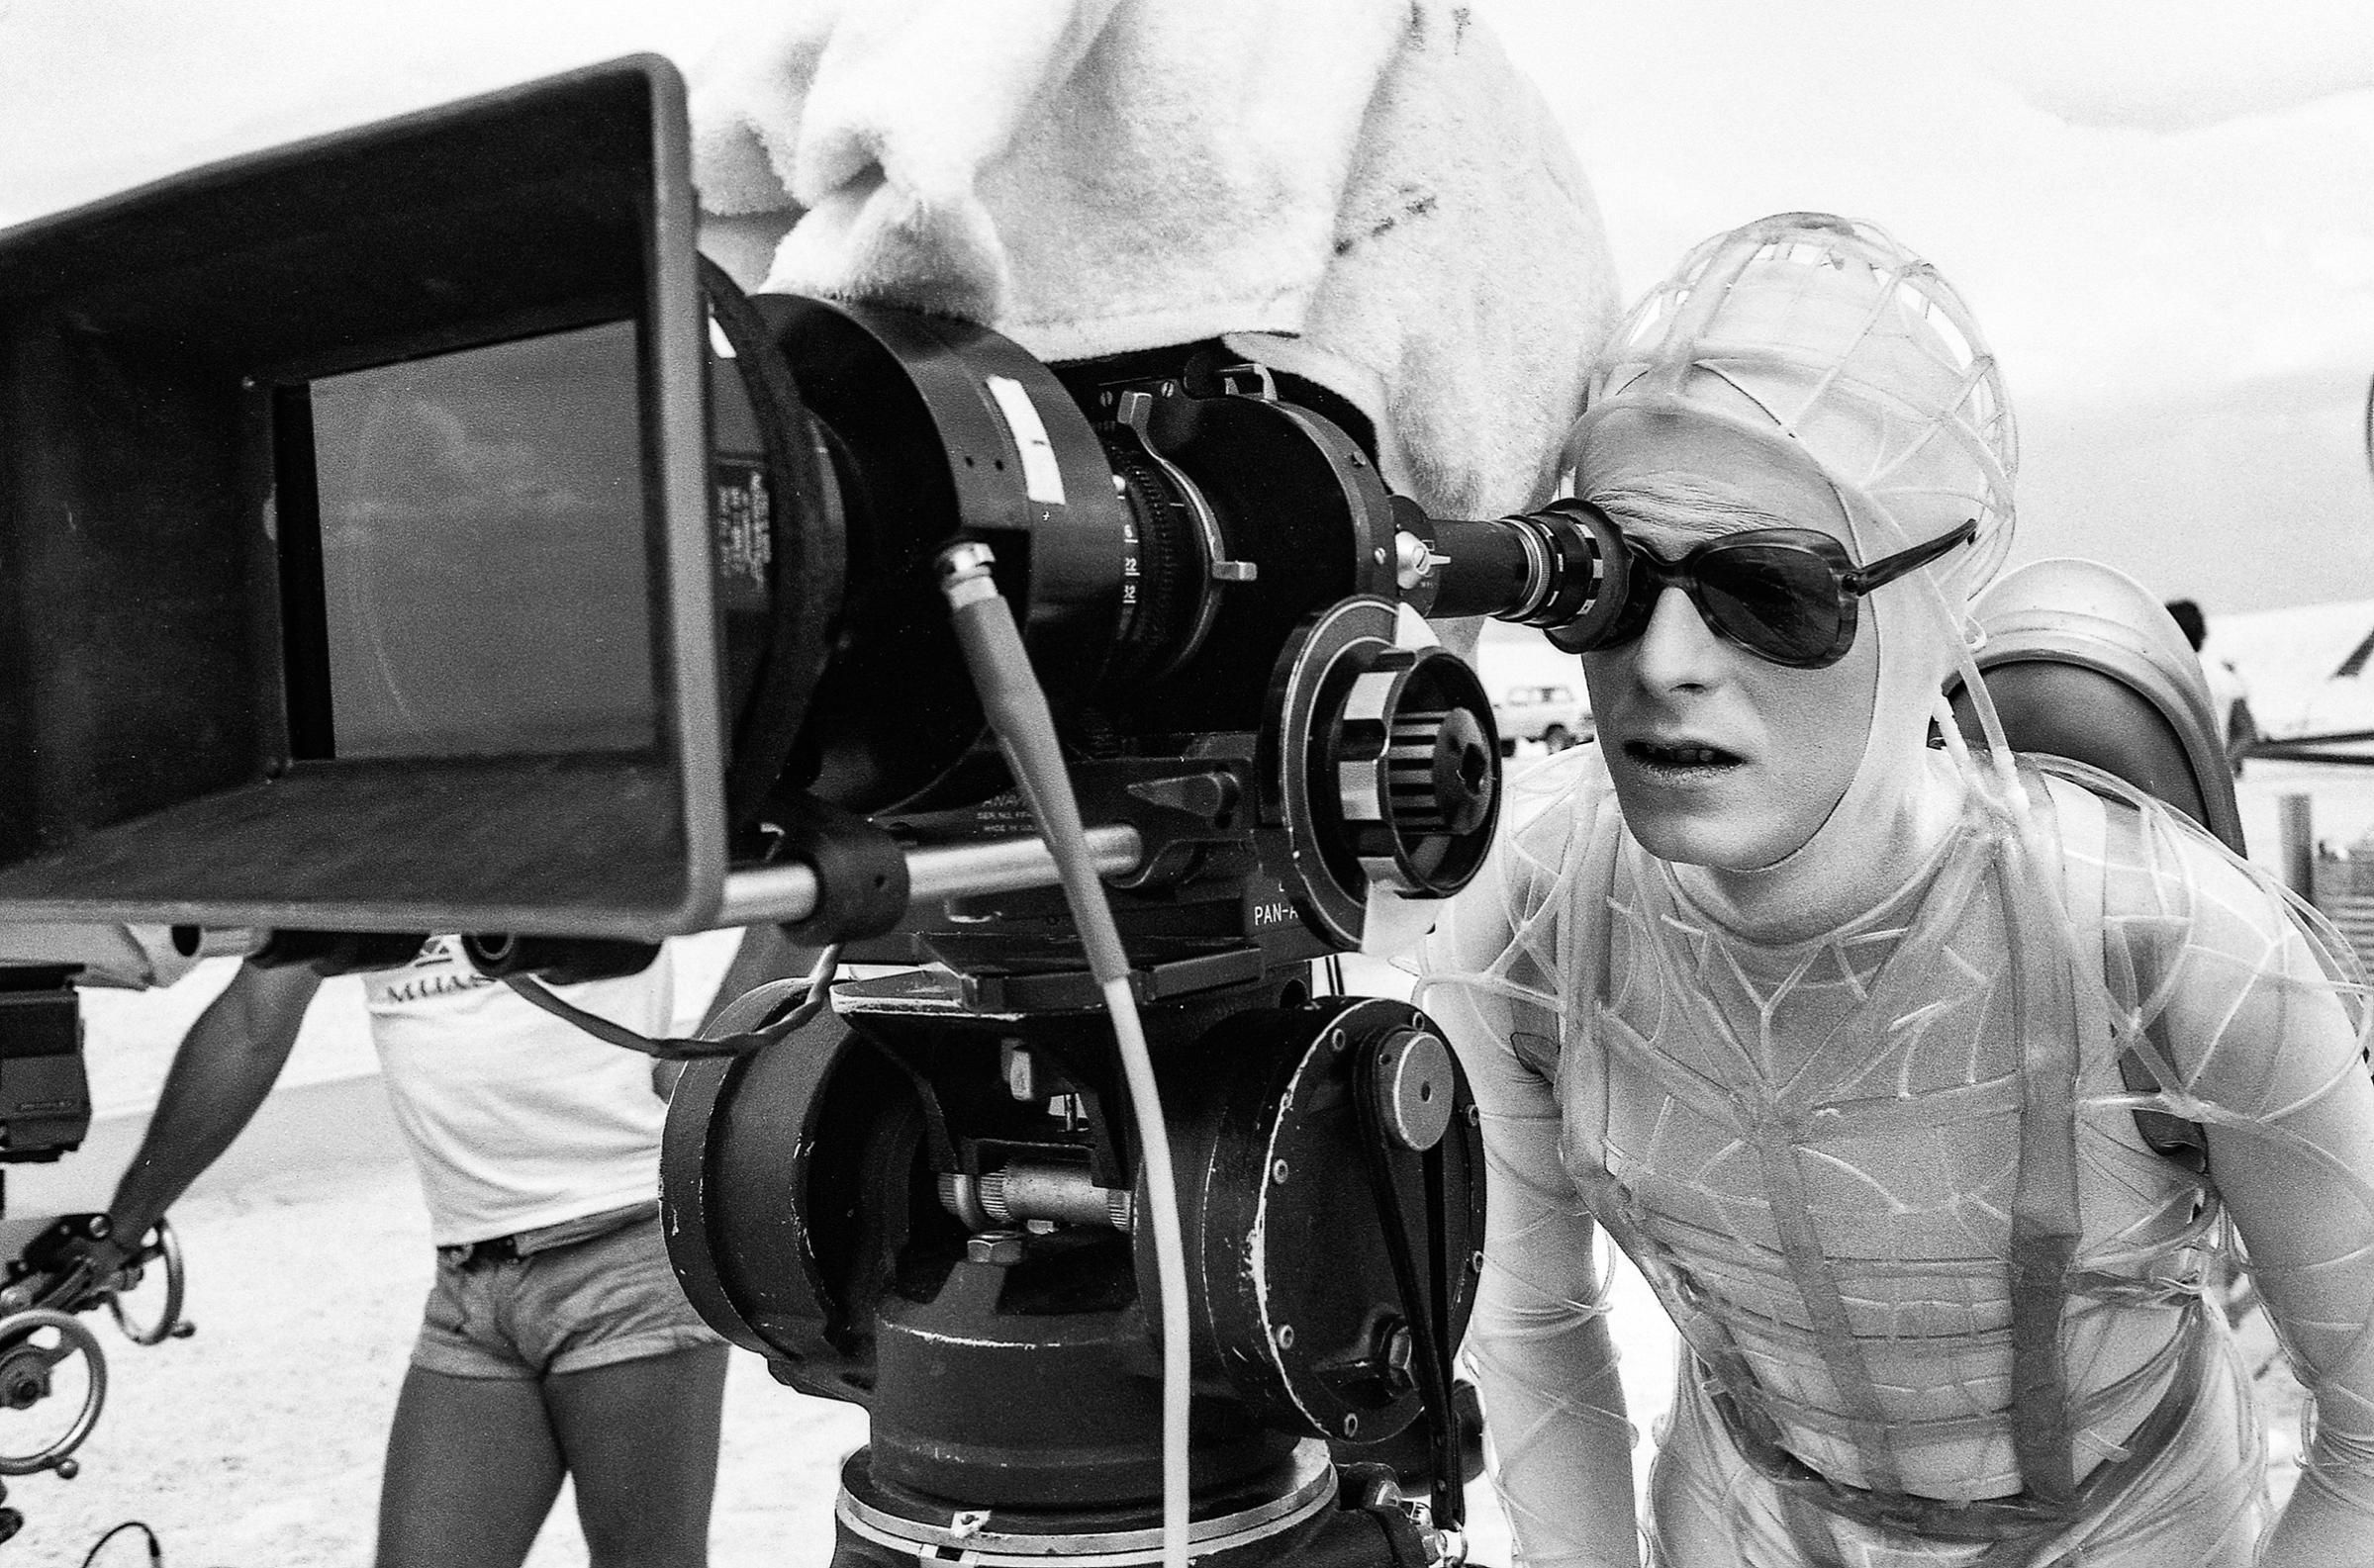 David Bowie behind the scenes on Nic Roeg's film The Man Who Fell To Earth.